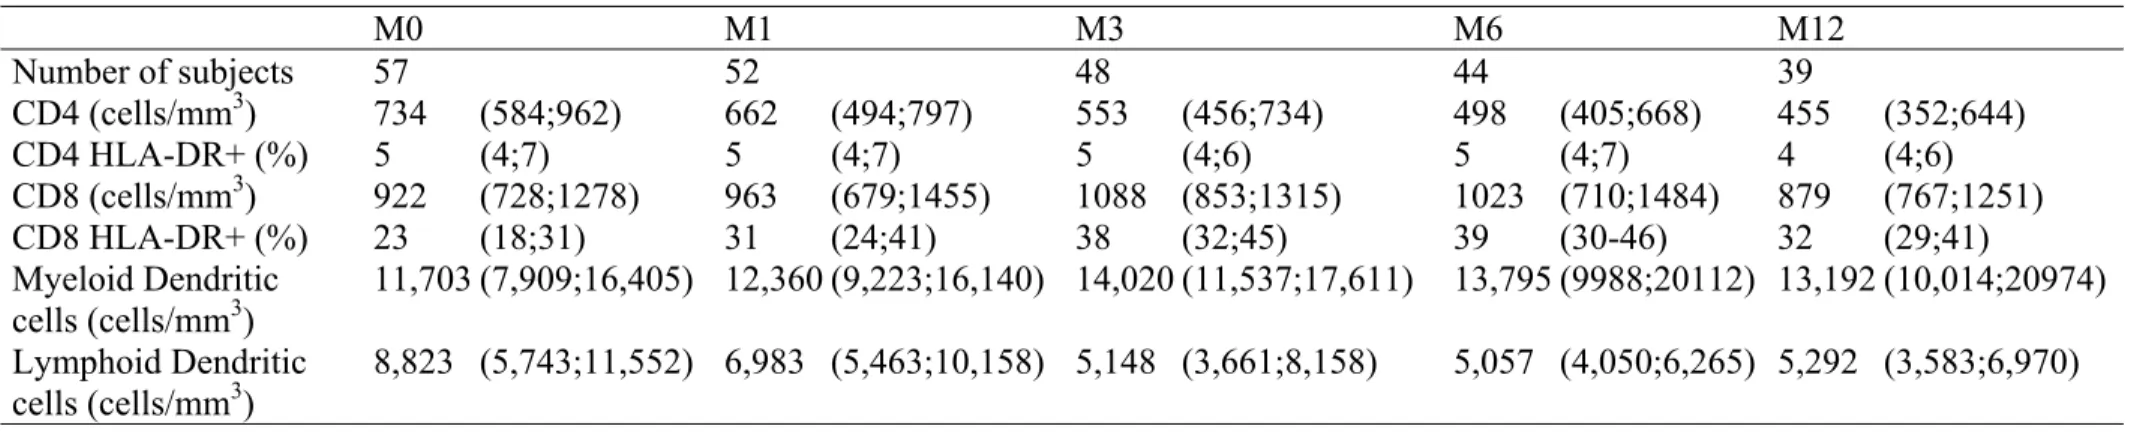 Table 2. Evolution of immunological markers values (median, interquartile range) from treatment interruption (M0), one month after  (M1), three months (M3), and every 3 months up to 12 months (M12)